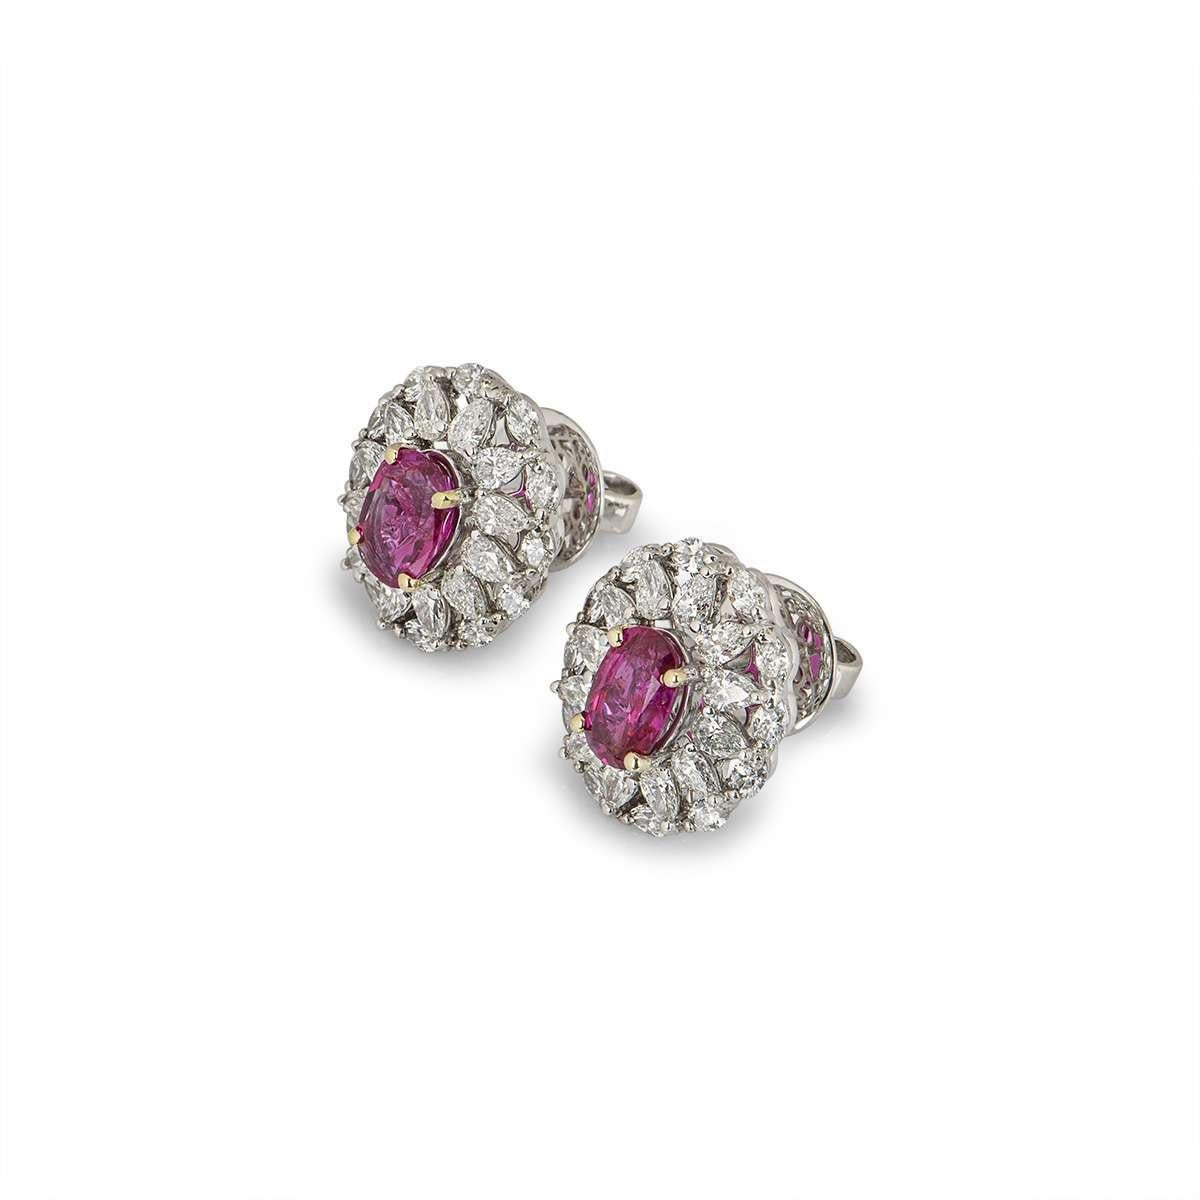 A pair of 18k white gold ruby and diamond earrings. The earrings are set with 2 oval cut pinkish-red natural Burmese rubies, weighing 1.38ct and 1.53ct. Surrounding the rubies are pear cut and marquise cut diamonds, totalling 2.75ct. The earrings